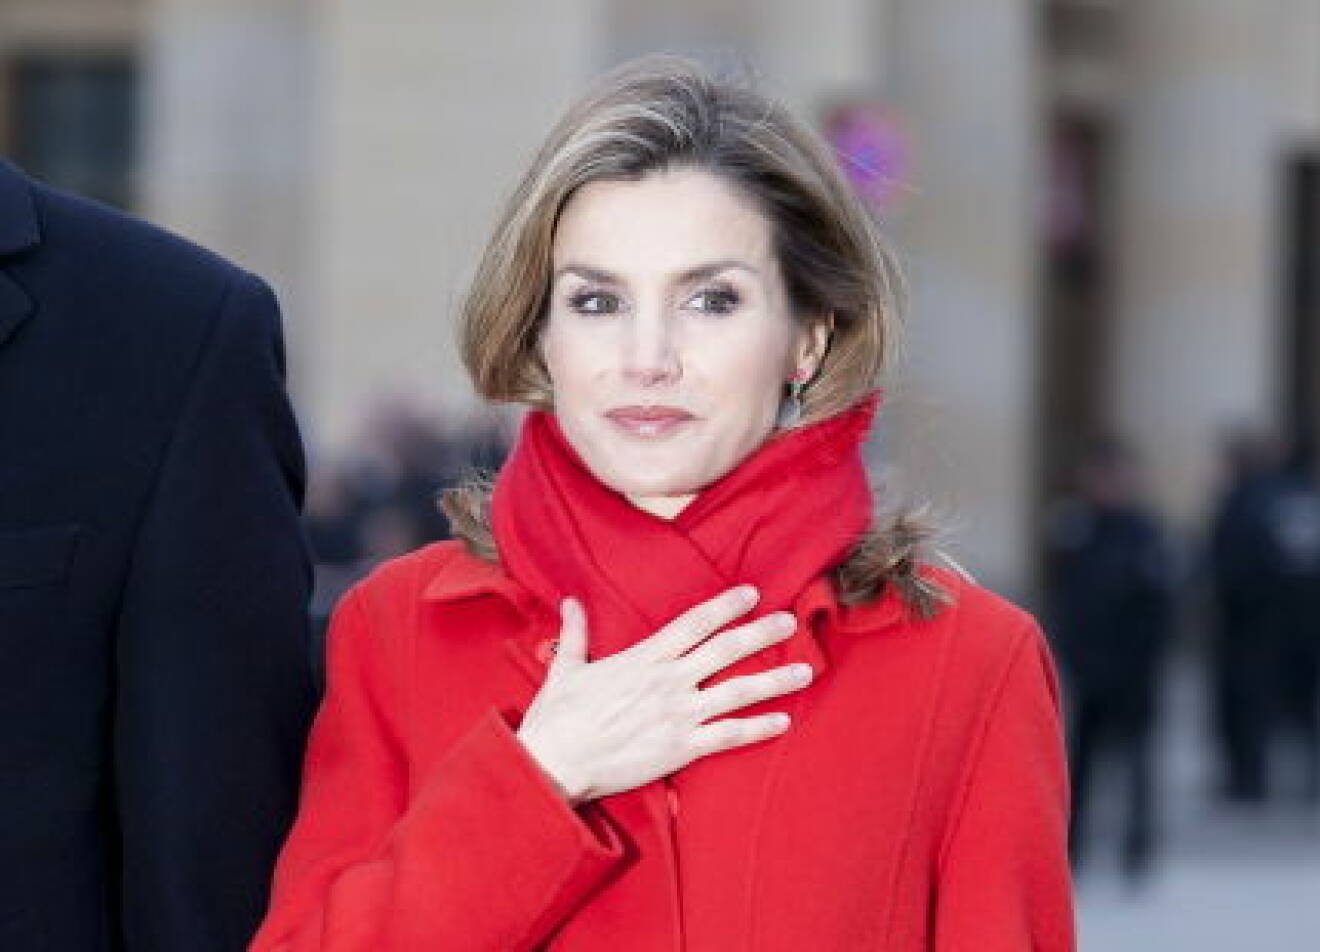 King Philip VI and Queen Letizia of Spain official visit to Berlin, Germany - 01 Dec 2014